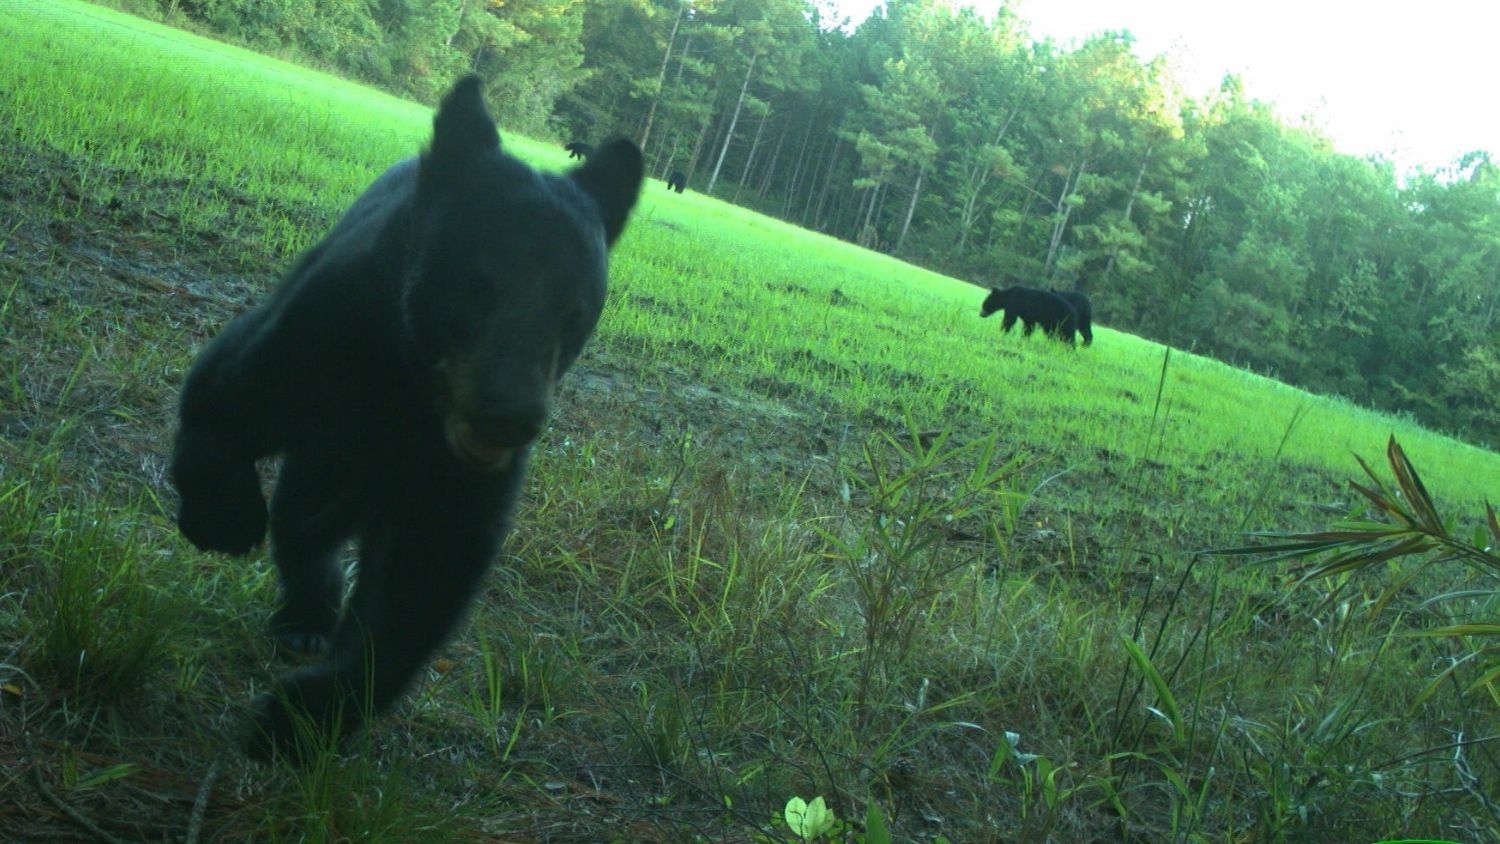 A citizen science study helped researchers capture wildlife images - Citizen Science Study Captures 2.2M Wildlife Images in North Carolina - College of Natural Resources News NC State University